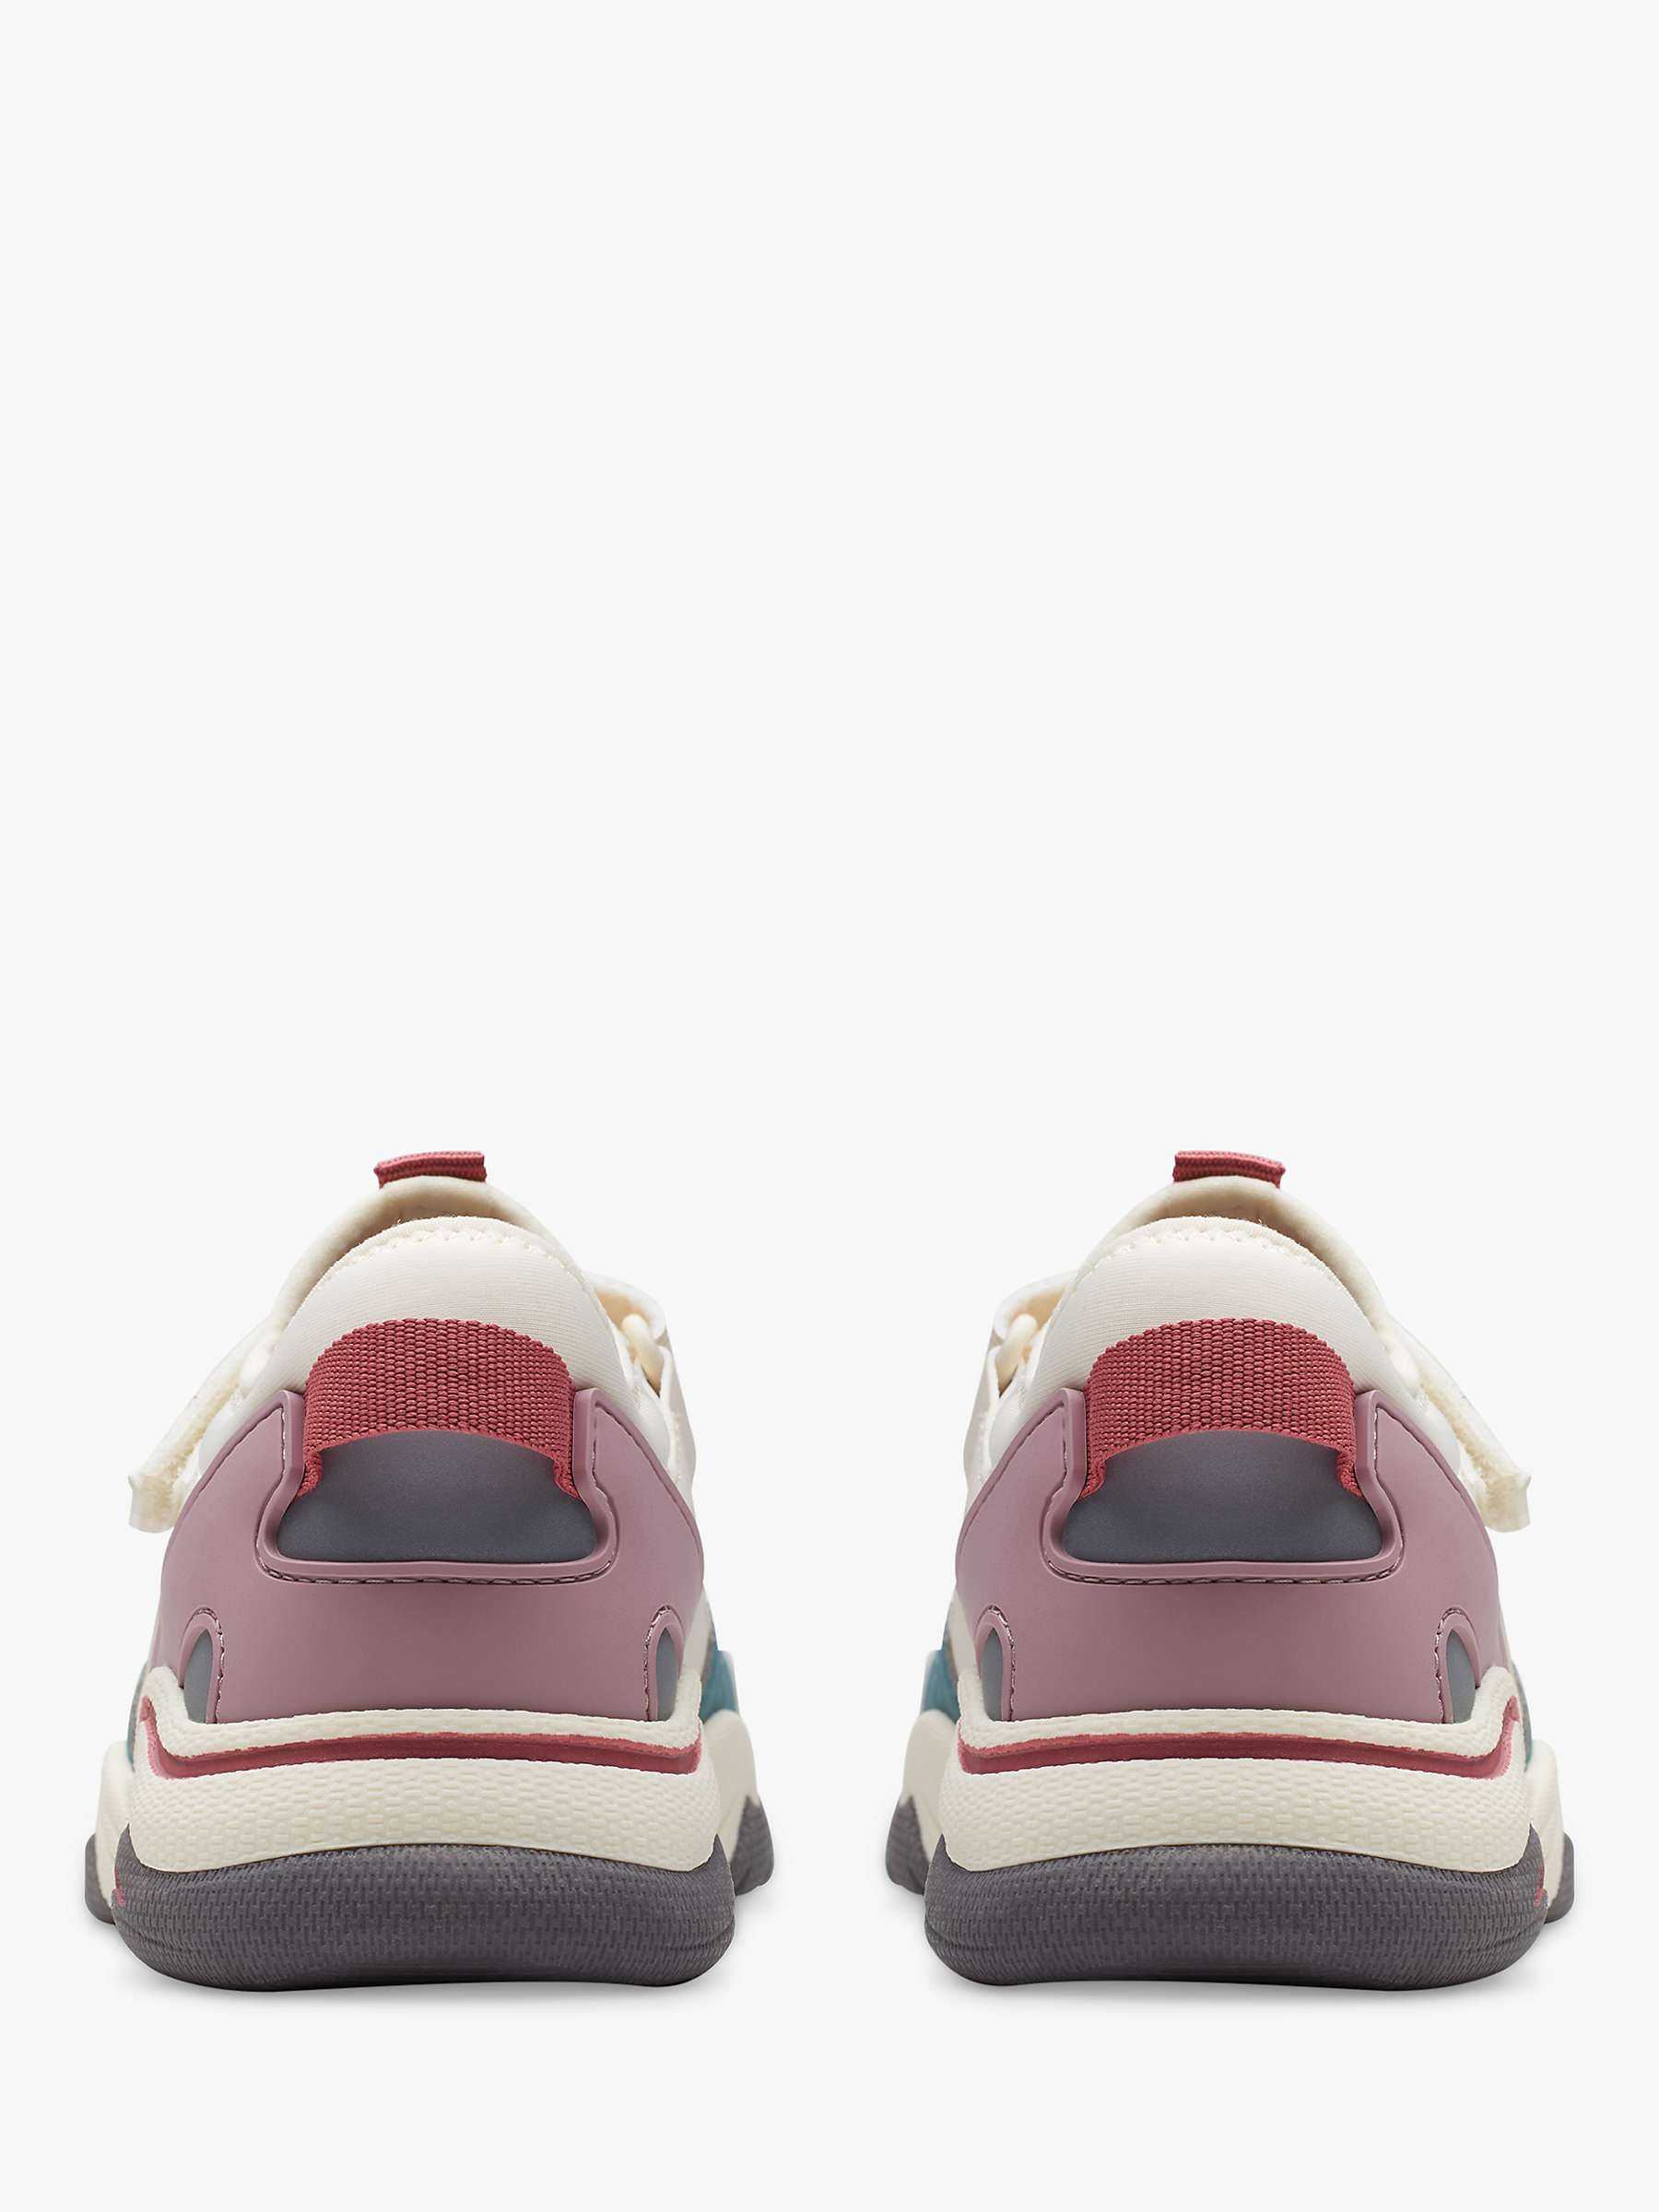 Buy Clarks Kids' Feather Hop Trainers, Off White Online at johnlewis.com